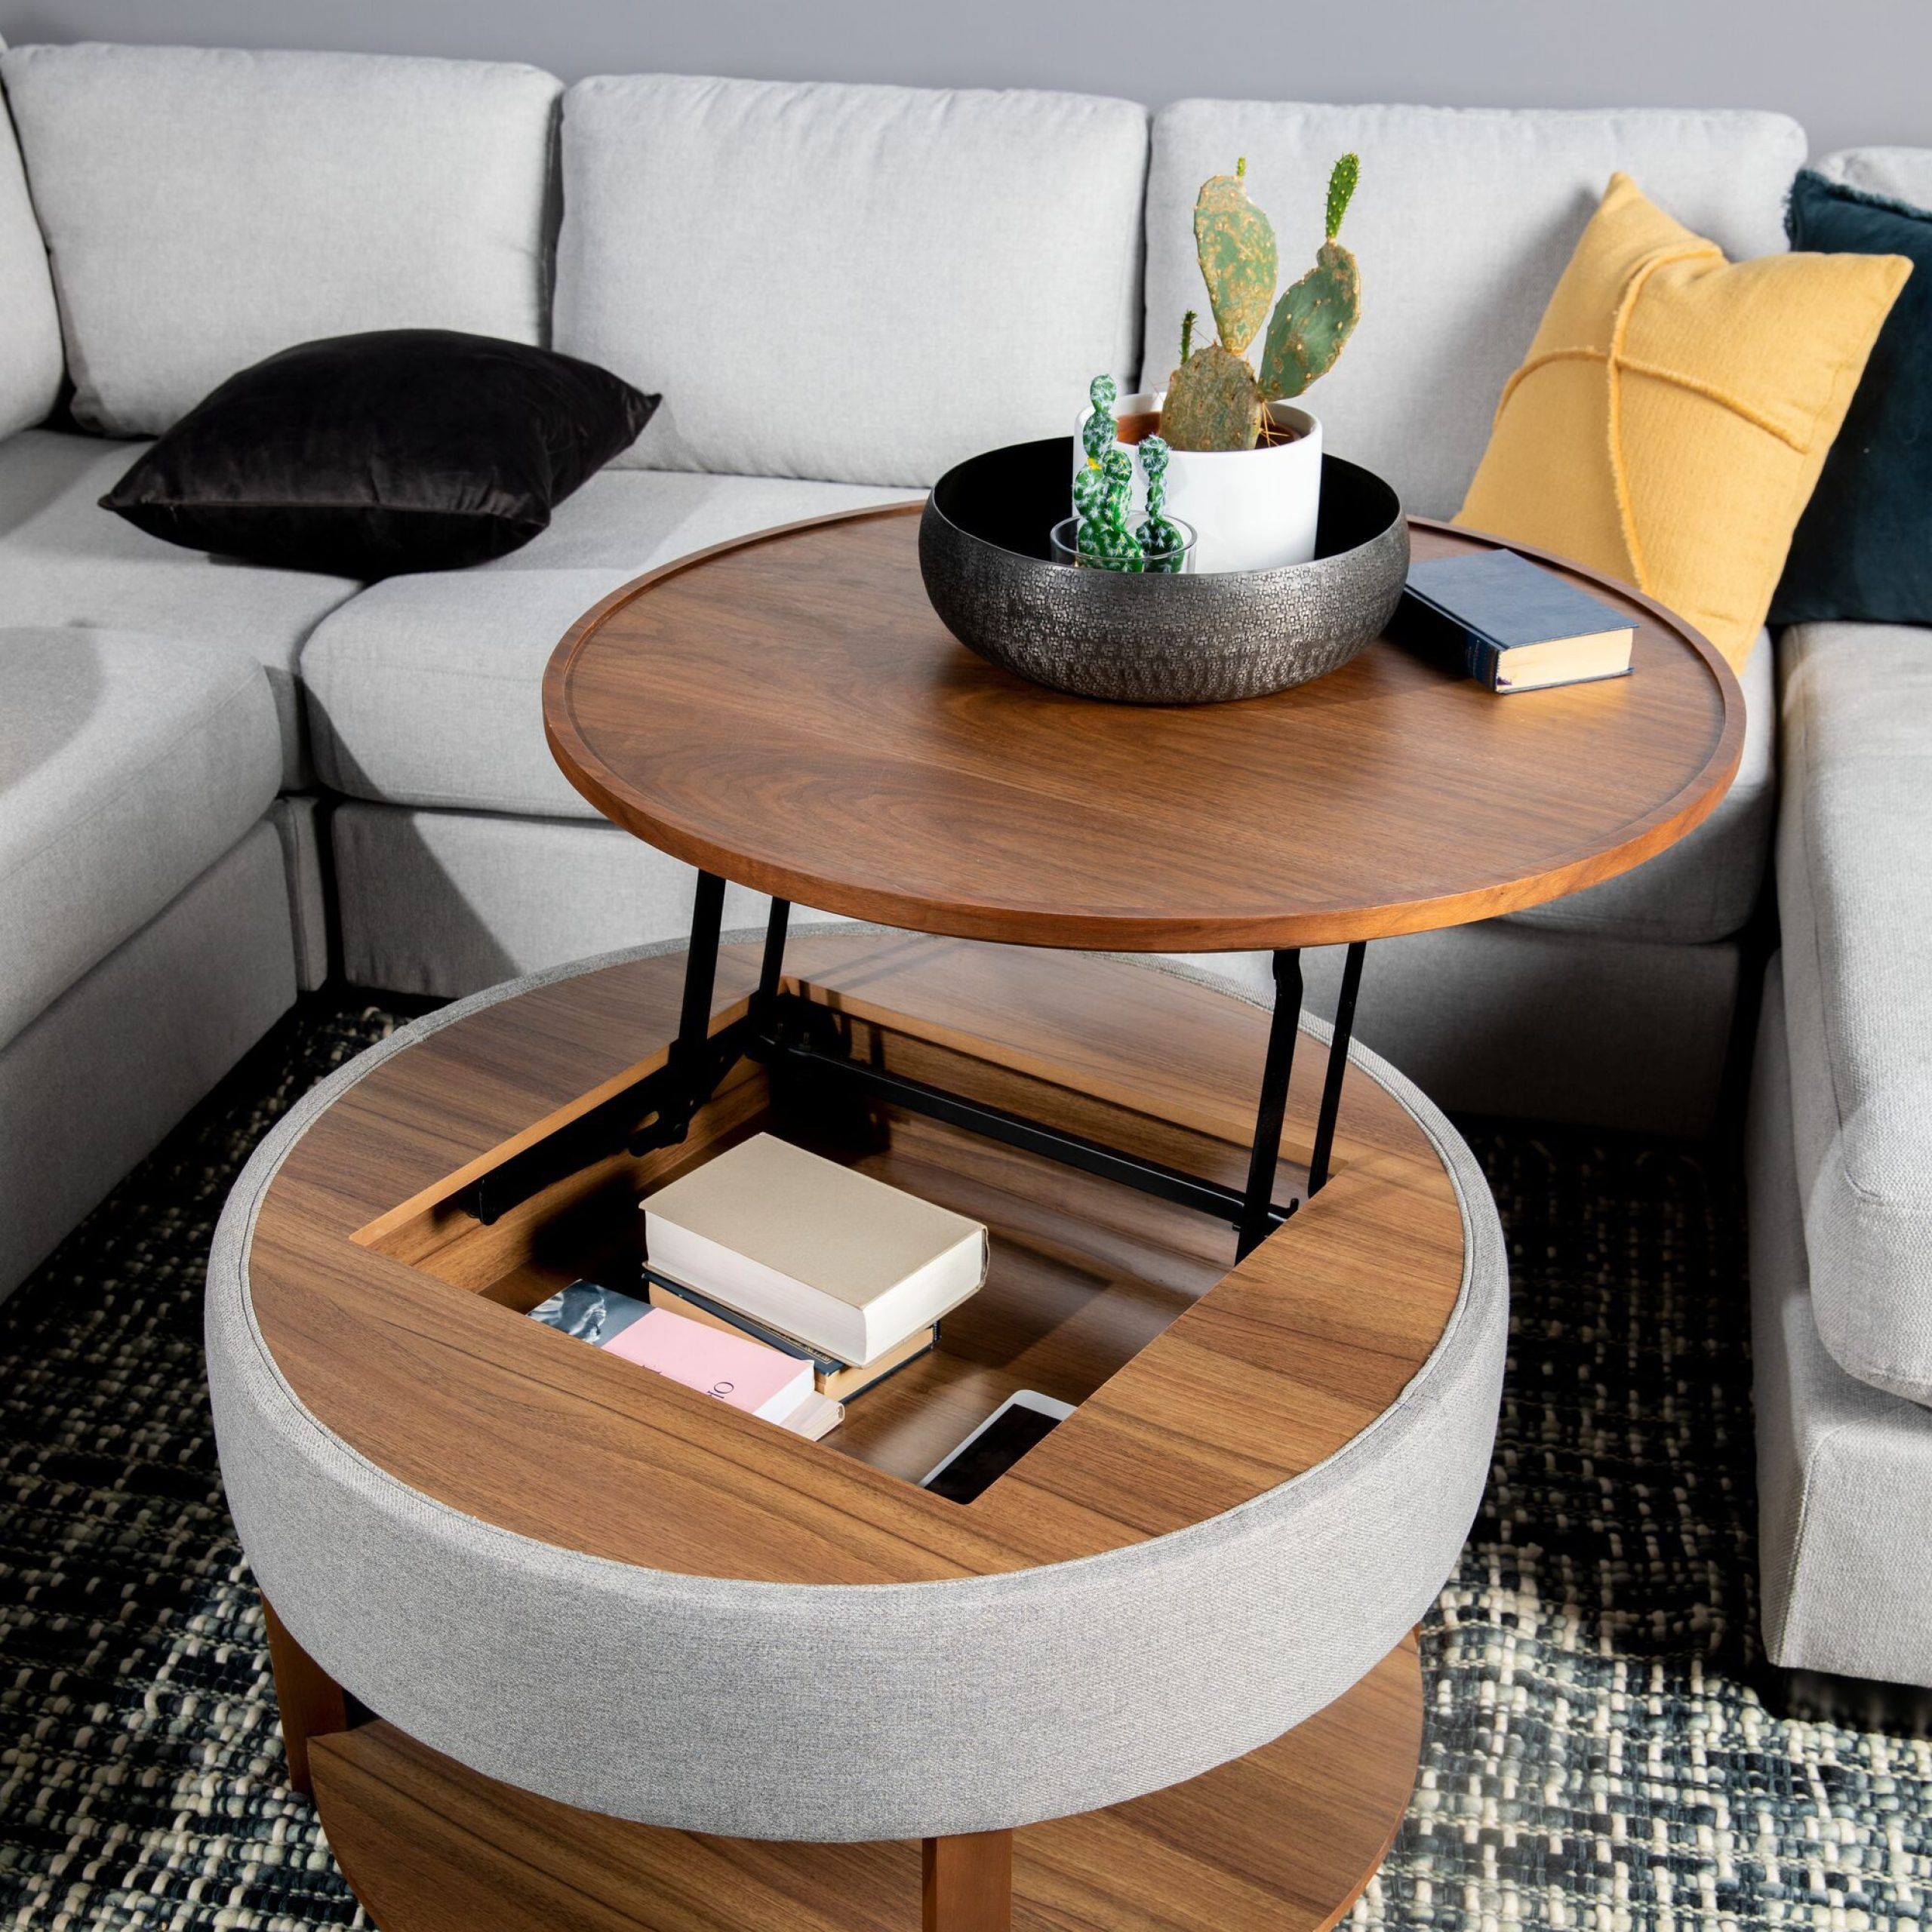 Damian Walnut Wood Veneer Lift Top Coffee Table With Storage In 2021 Throughout Modern Wooden Lift Top Tables (Gallery 9 of 20)